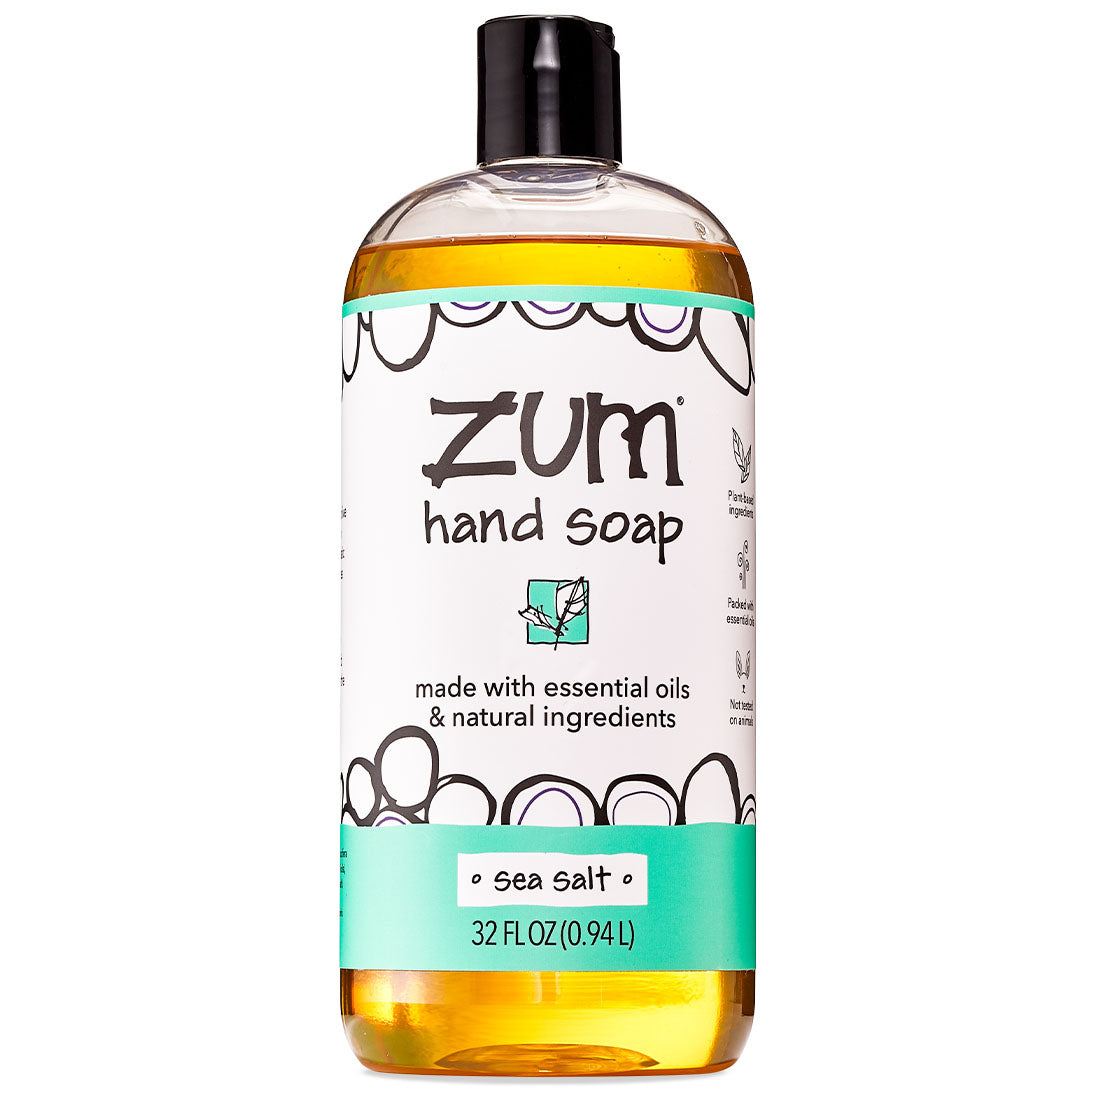 Large round bottle with pop top that contains sea salt scented liquid hand soap.